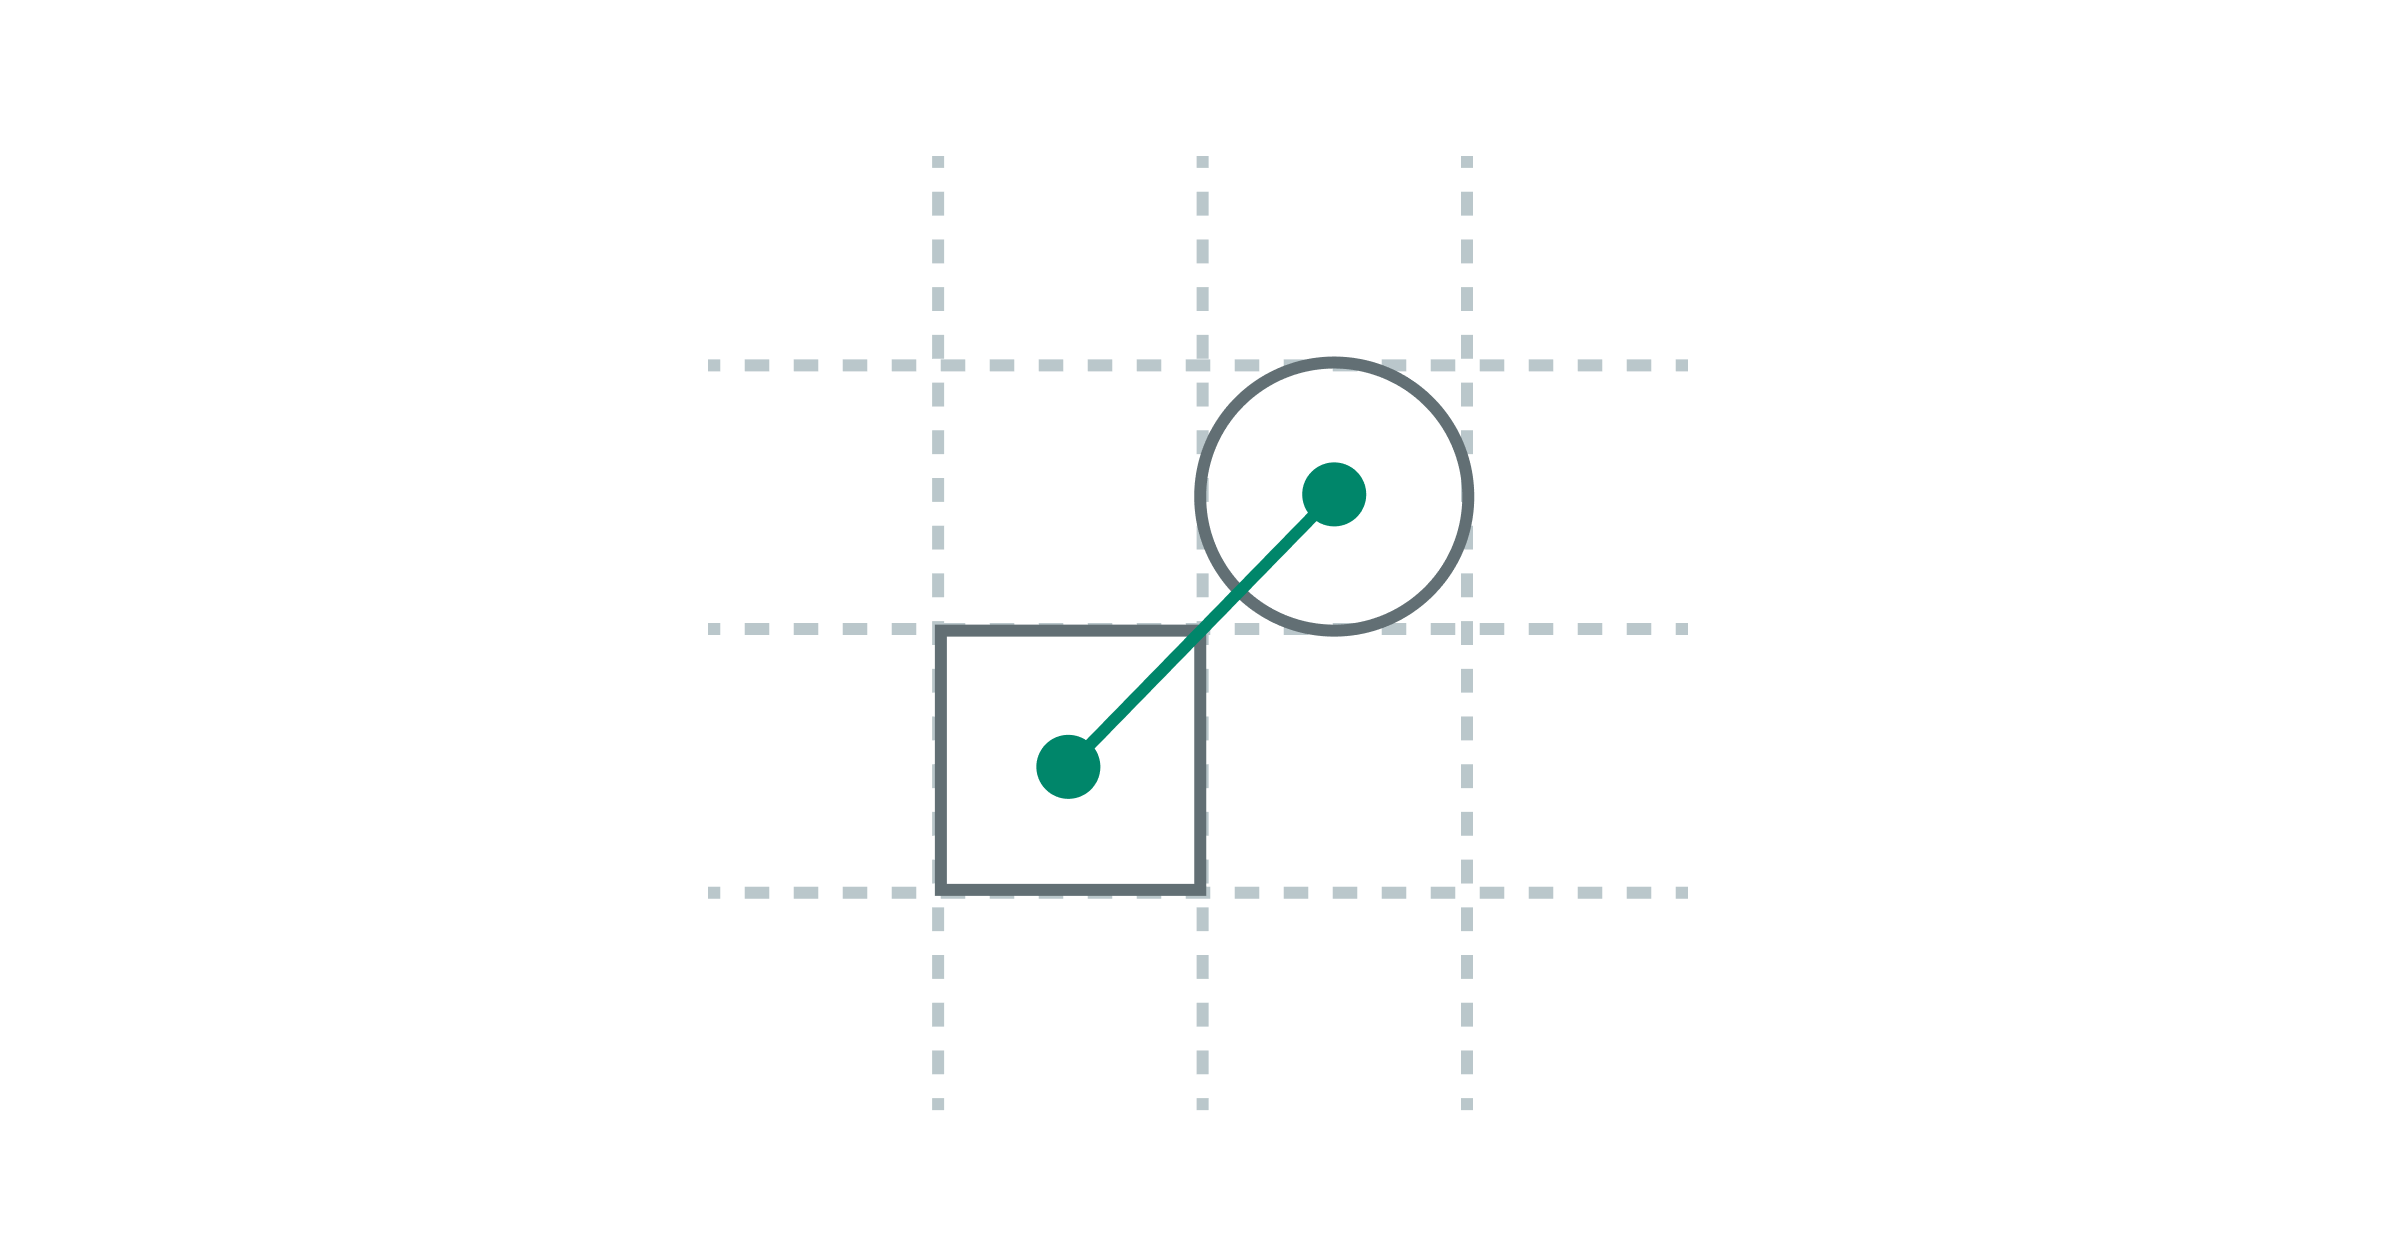 a transparent grid illustration connecting a circle and square representing the strategic planning process